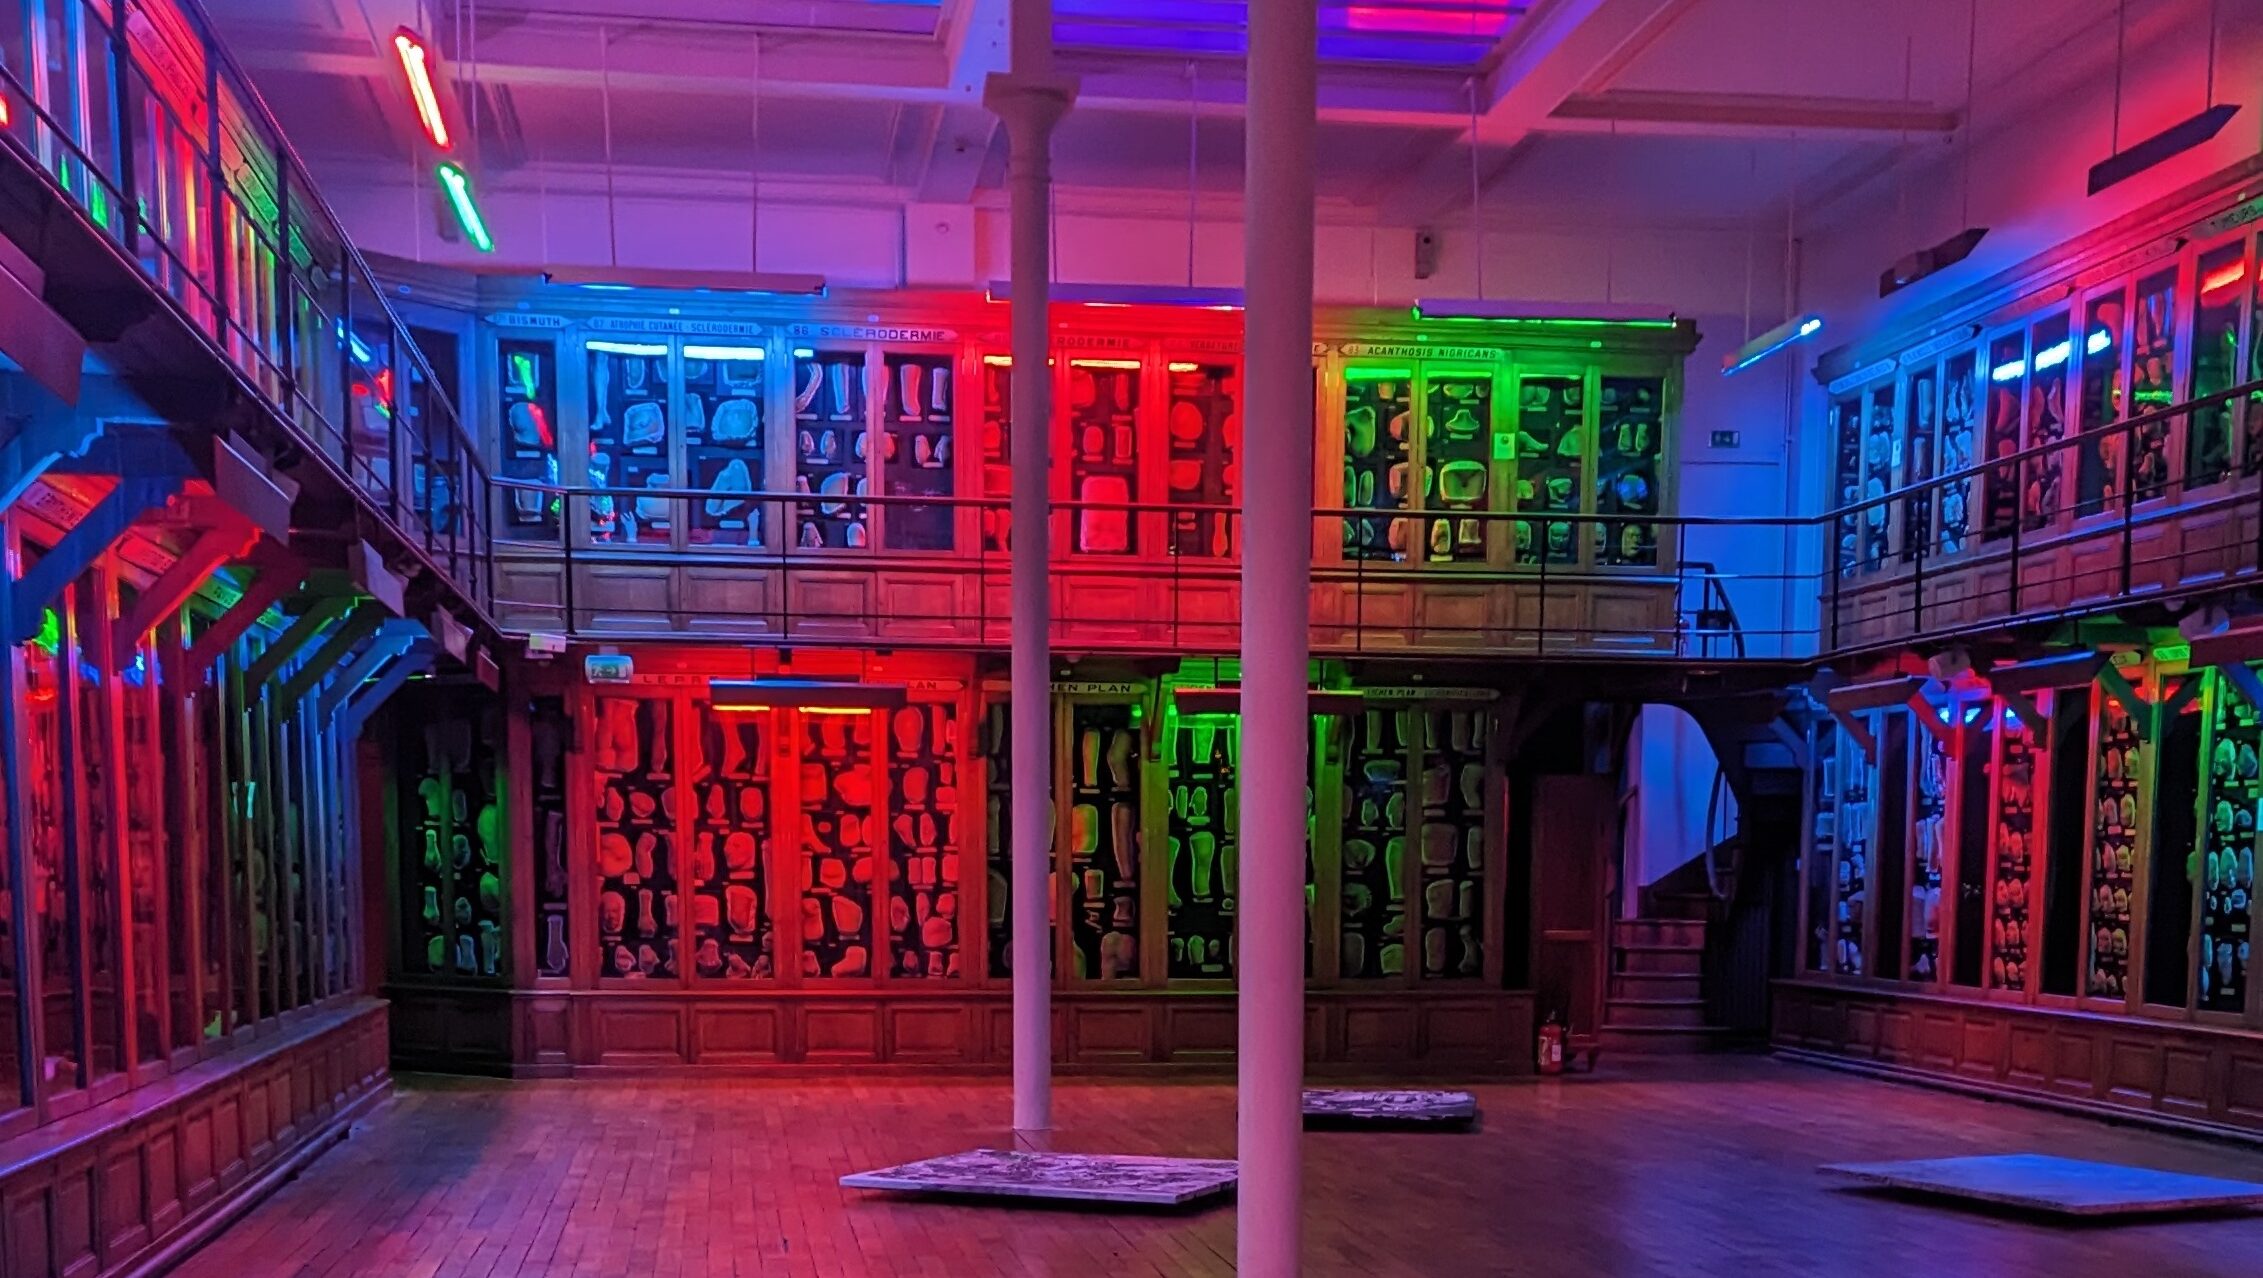 The artist duo 'The Bells Angels' has installed lights, sounds and images in the Musée des Moulages in Paris, drenching the room in a creepy red, blue and green light.